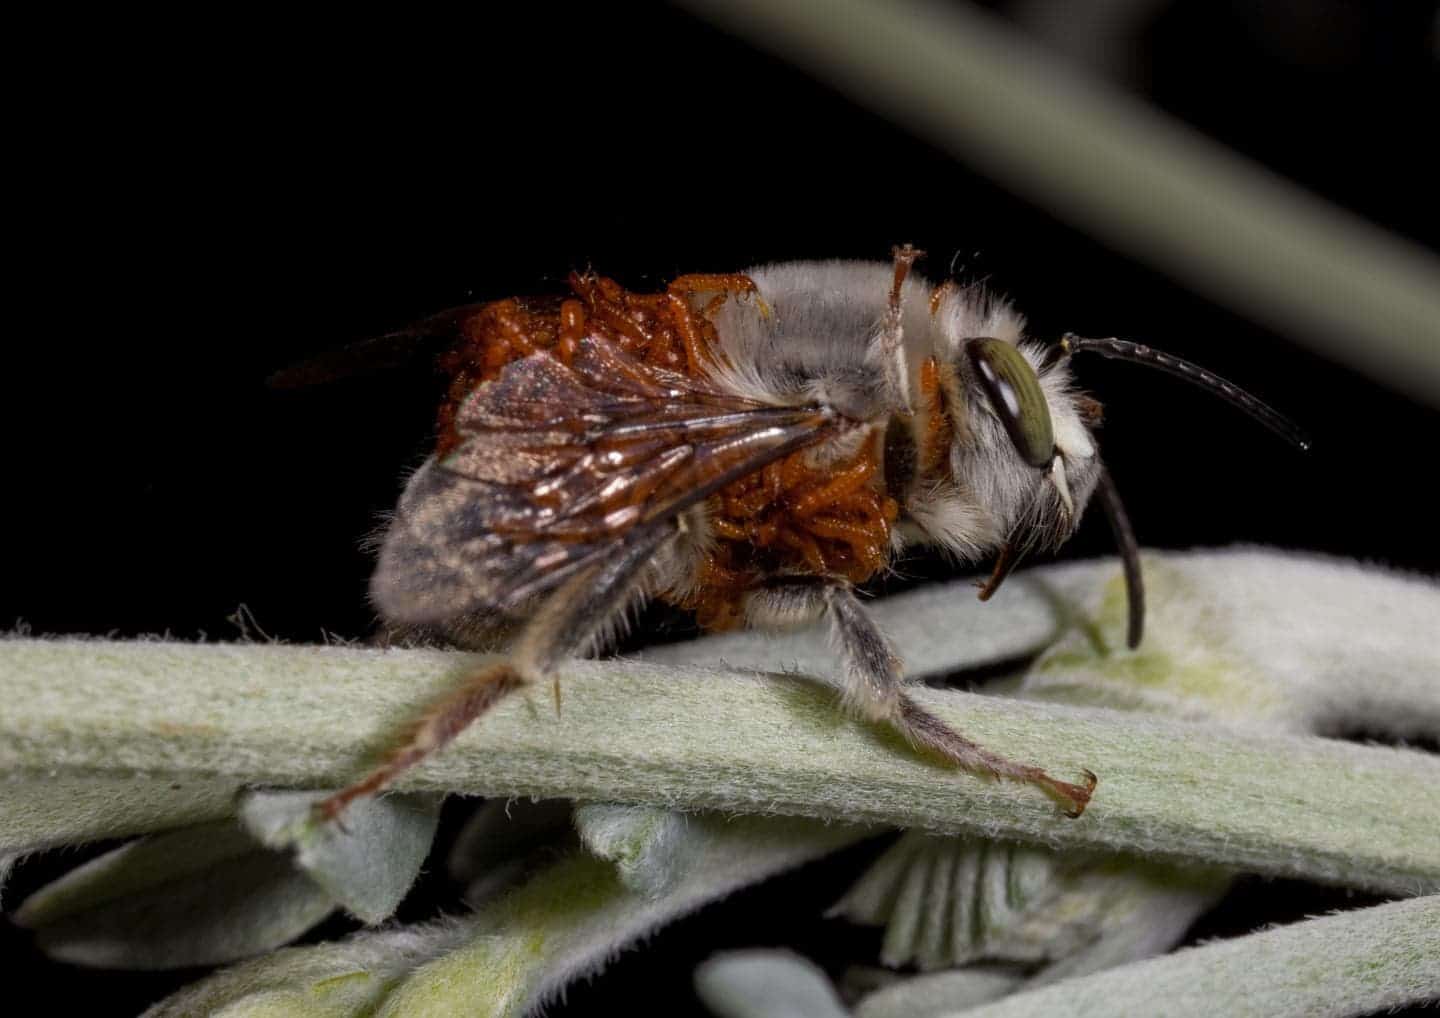 A male digger bee (Habropoda pallida) from the Mojave Desert covered with Meloe franciscanus triungulins (larvae). Credit: Leslie Saul-Gershenz.